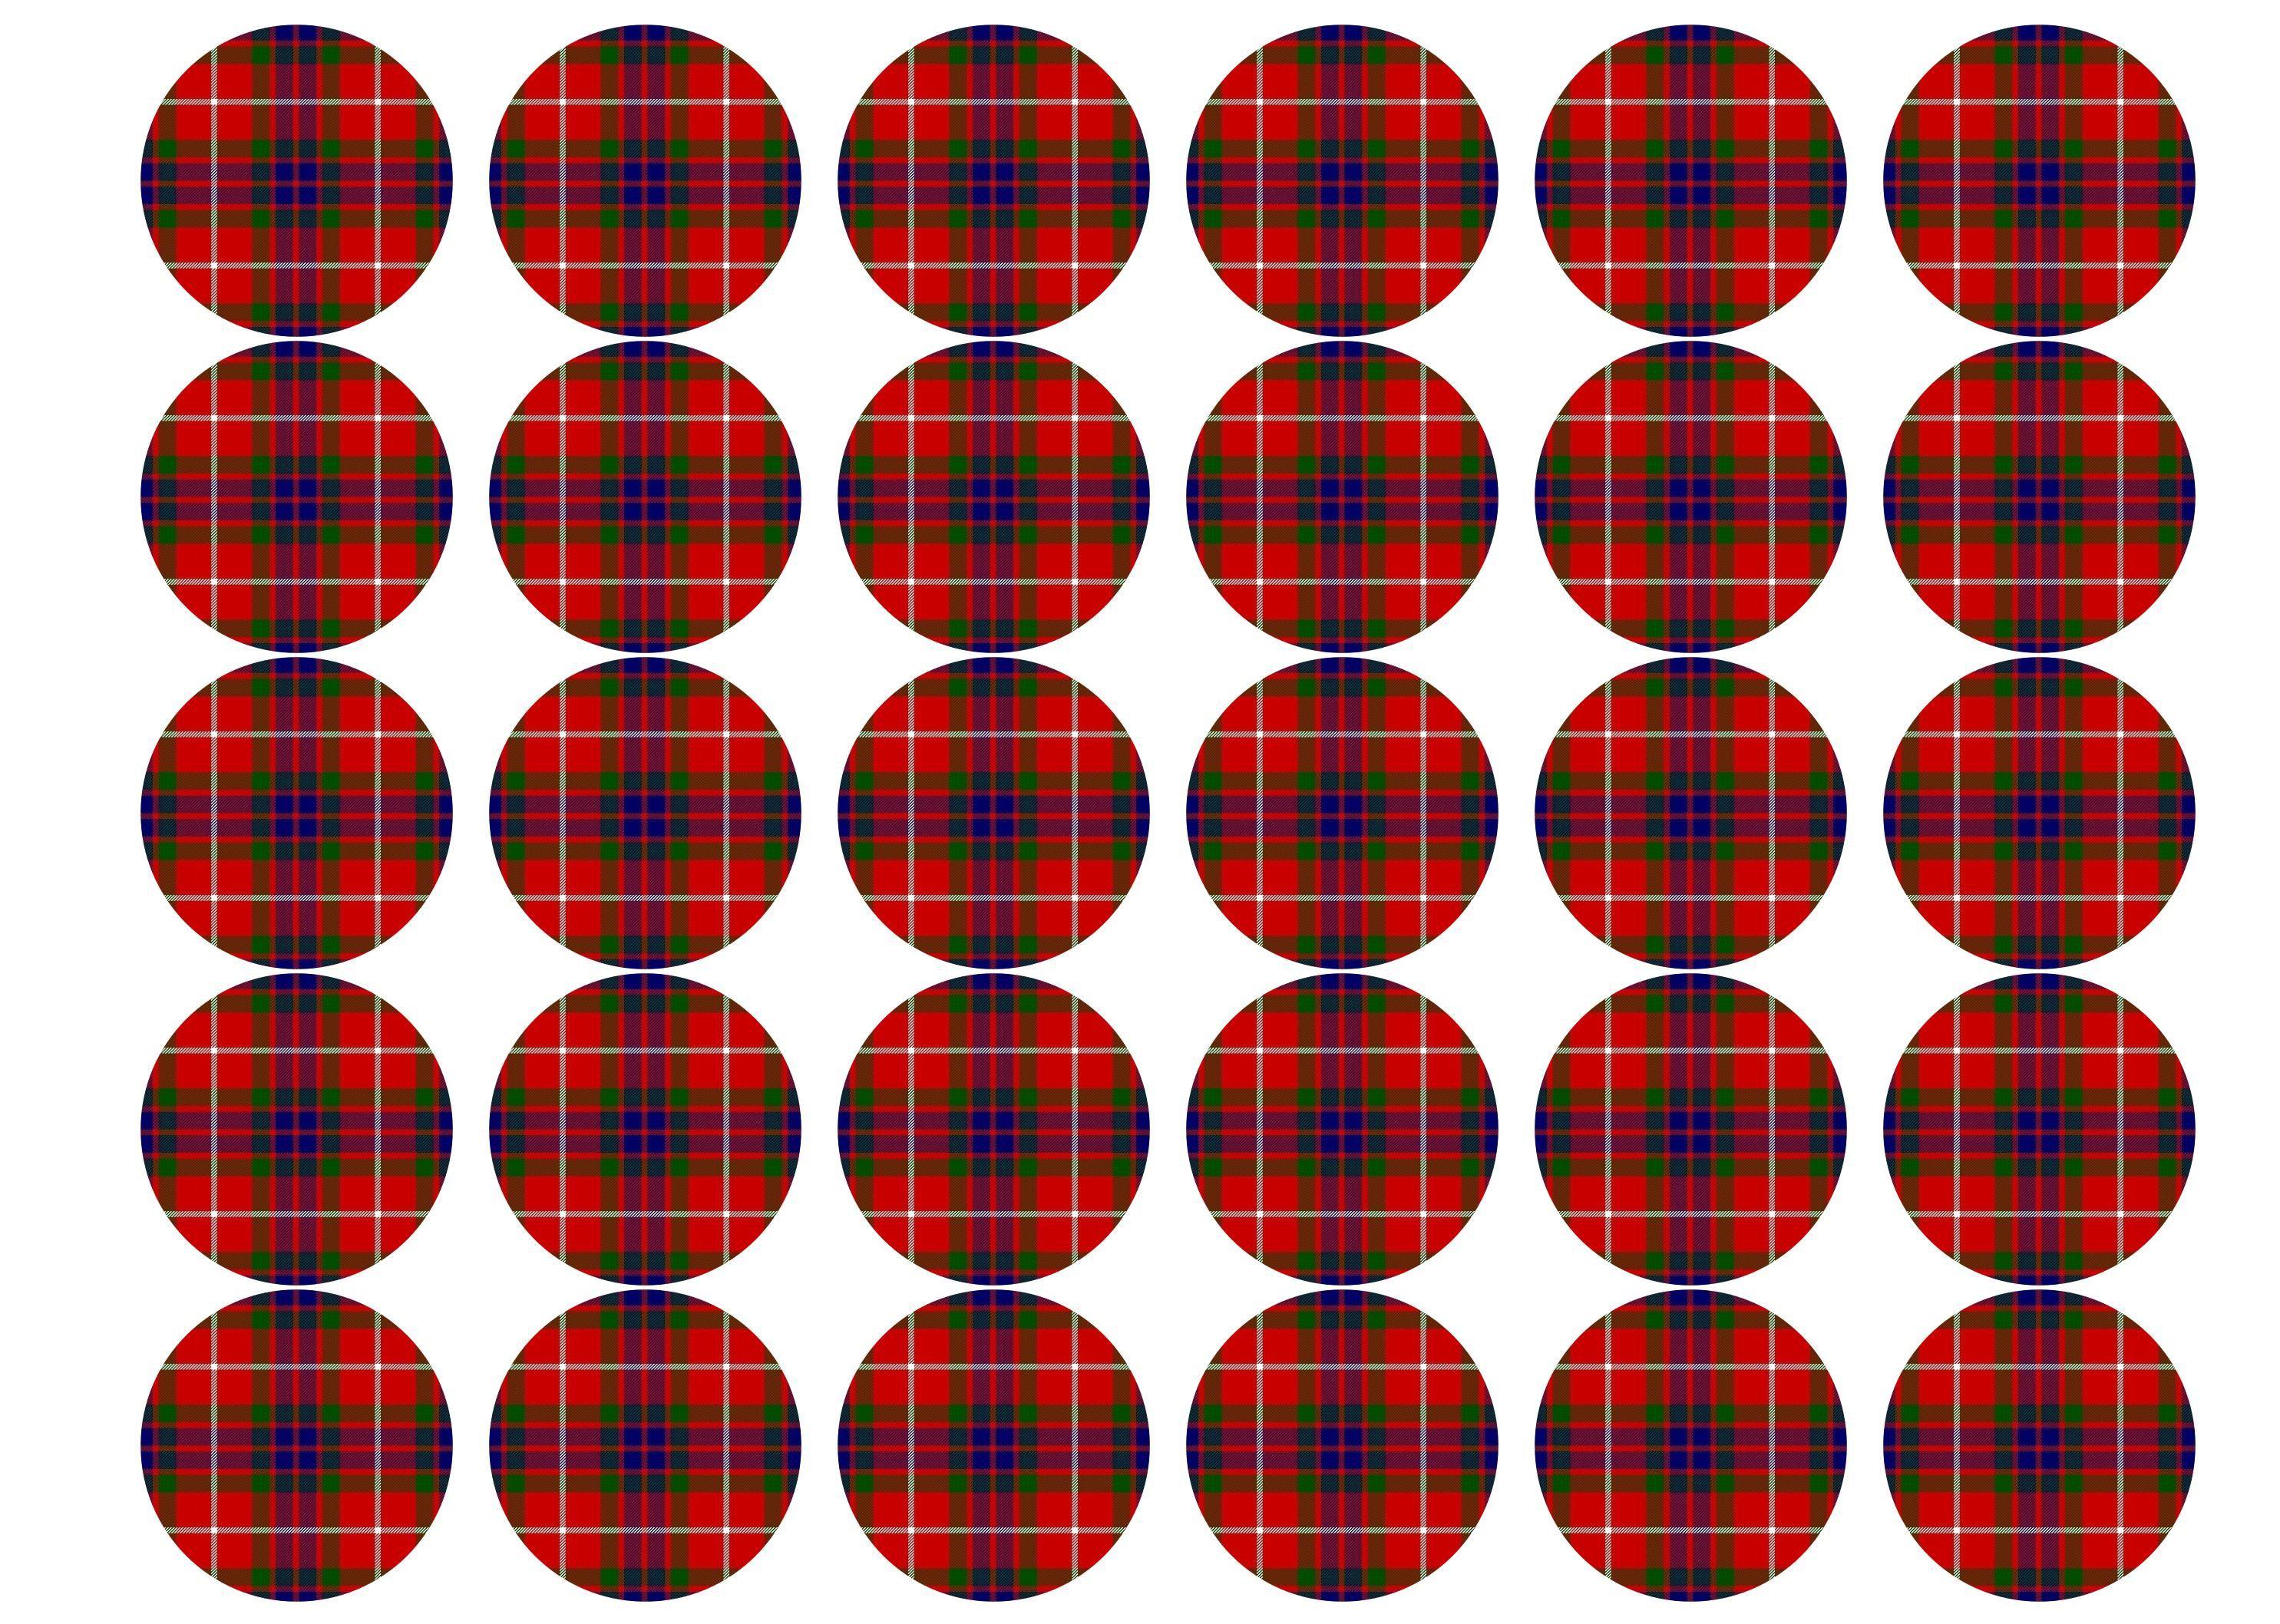 Printed edible cupcake toppers with the Fraser tartan